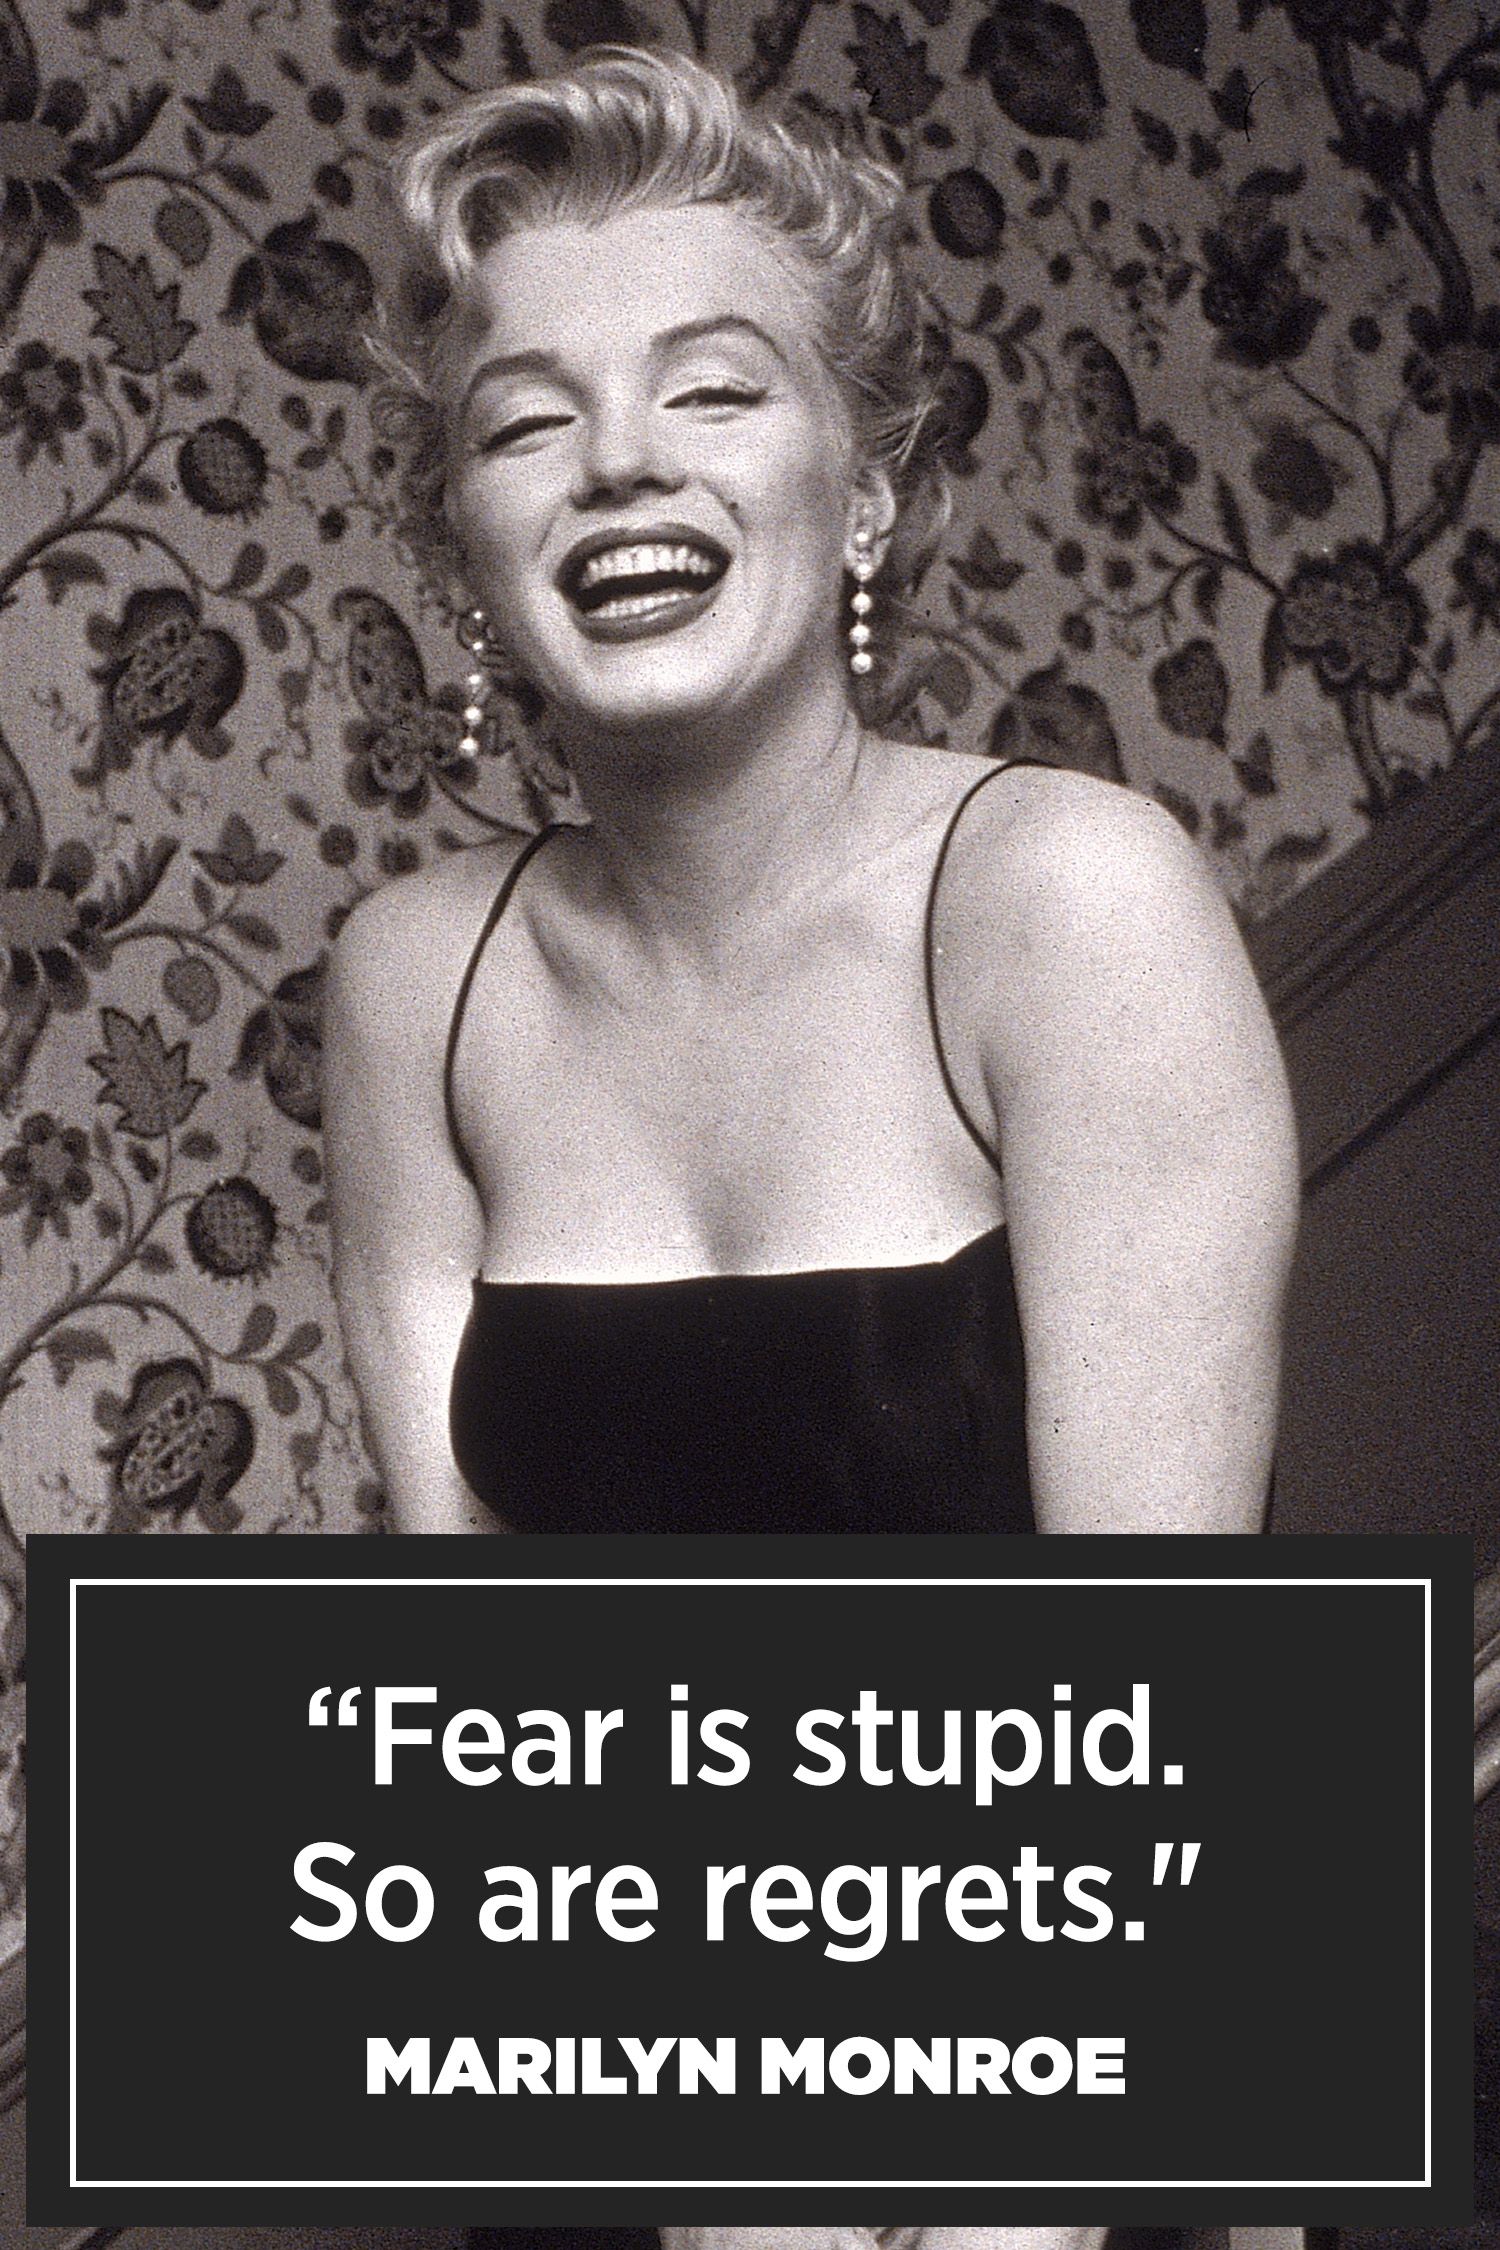 hbz quote marilyn19